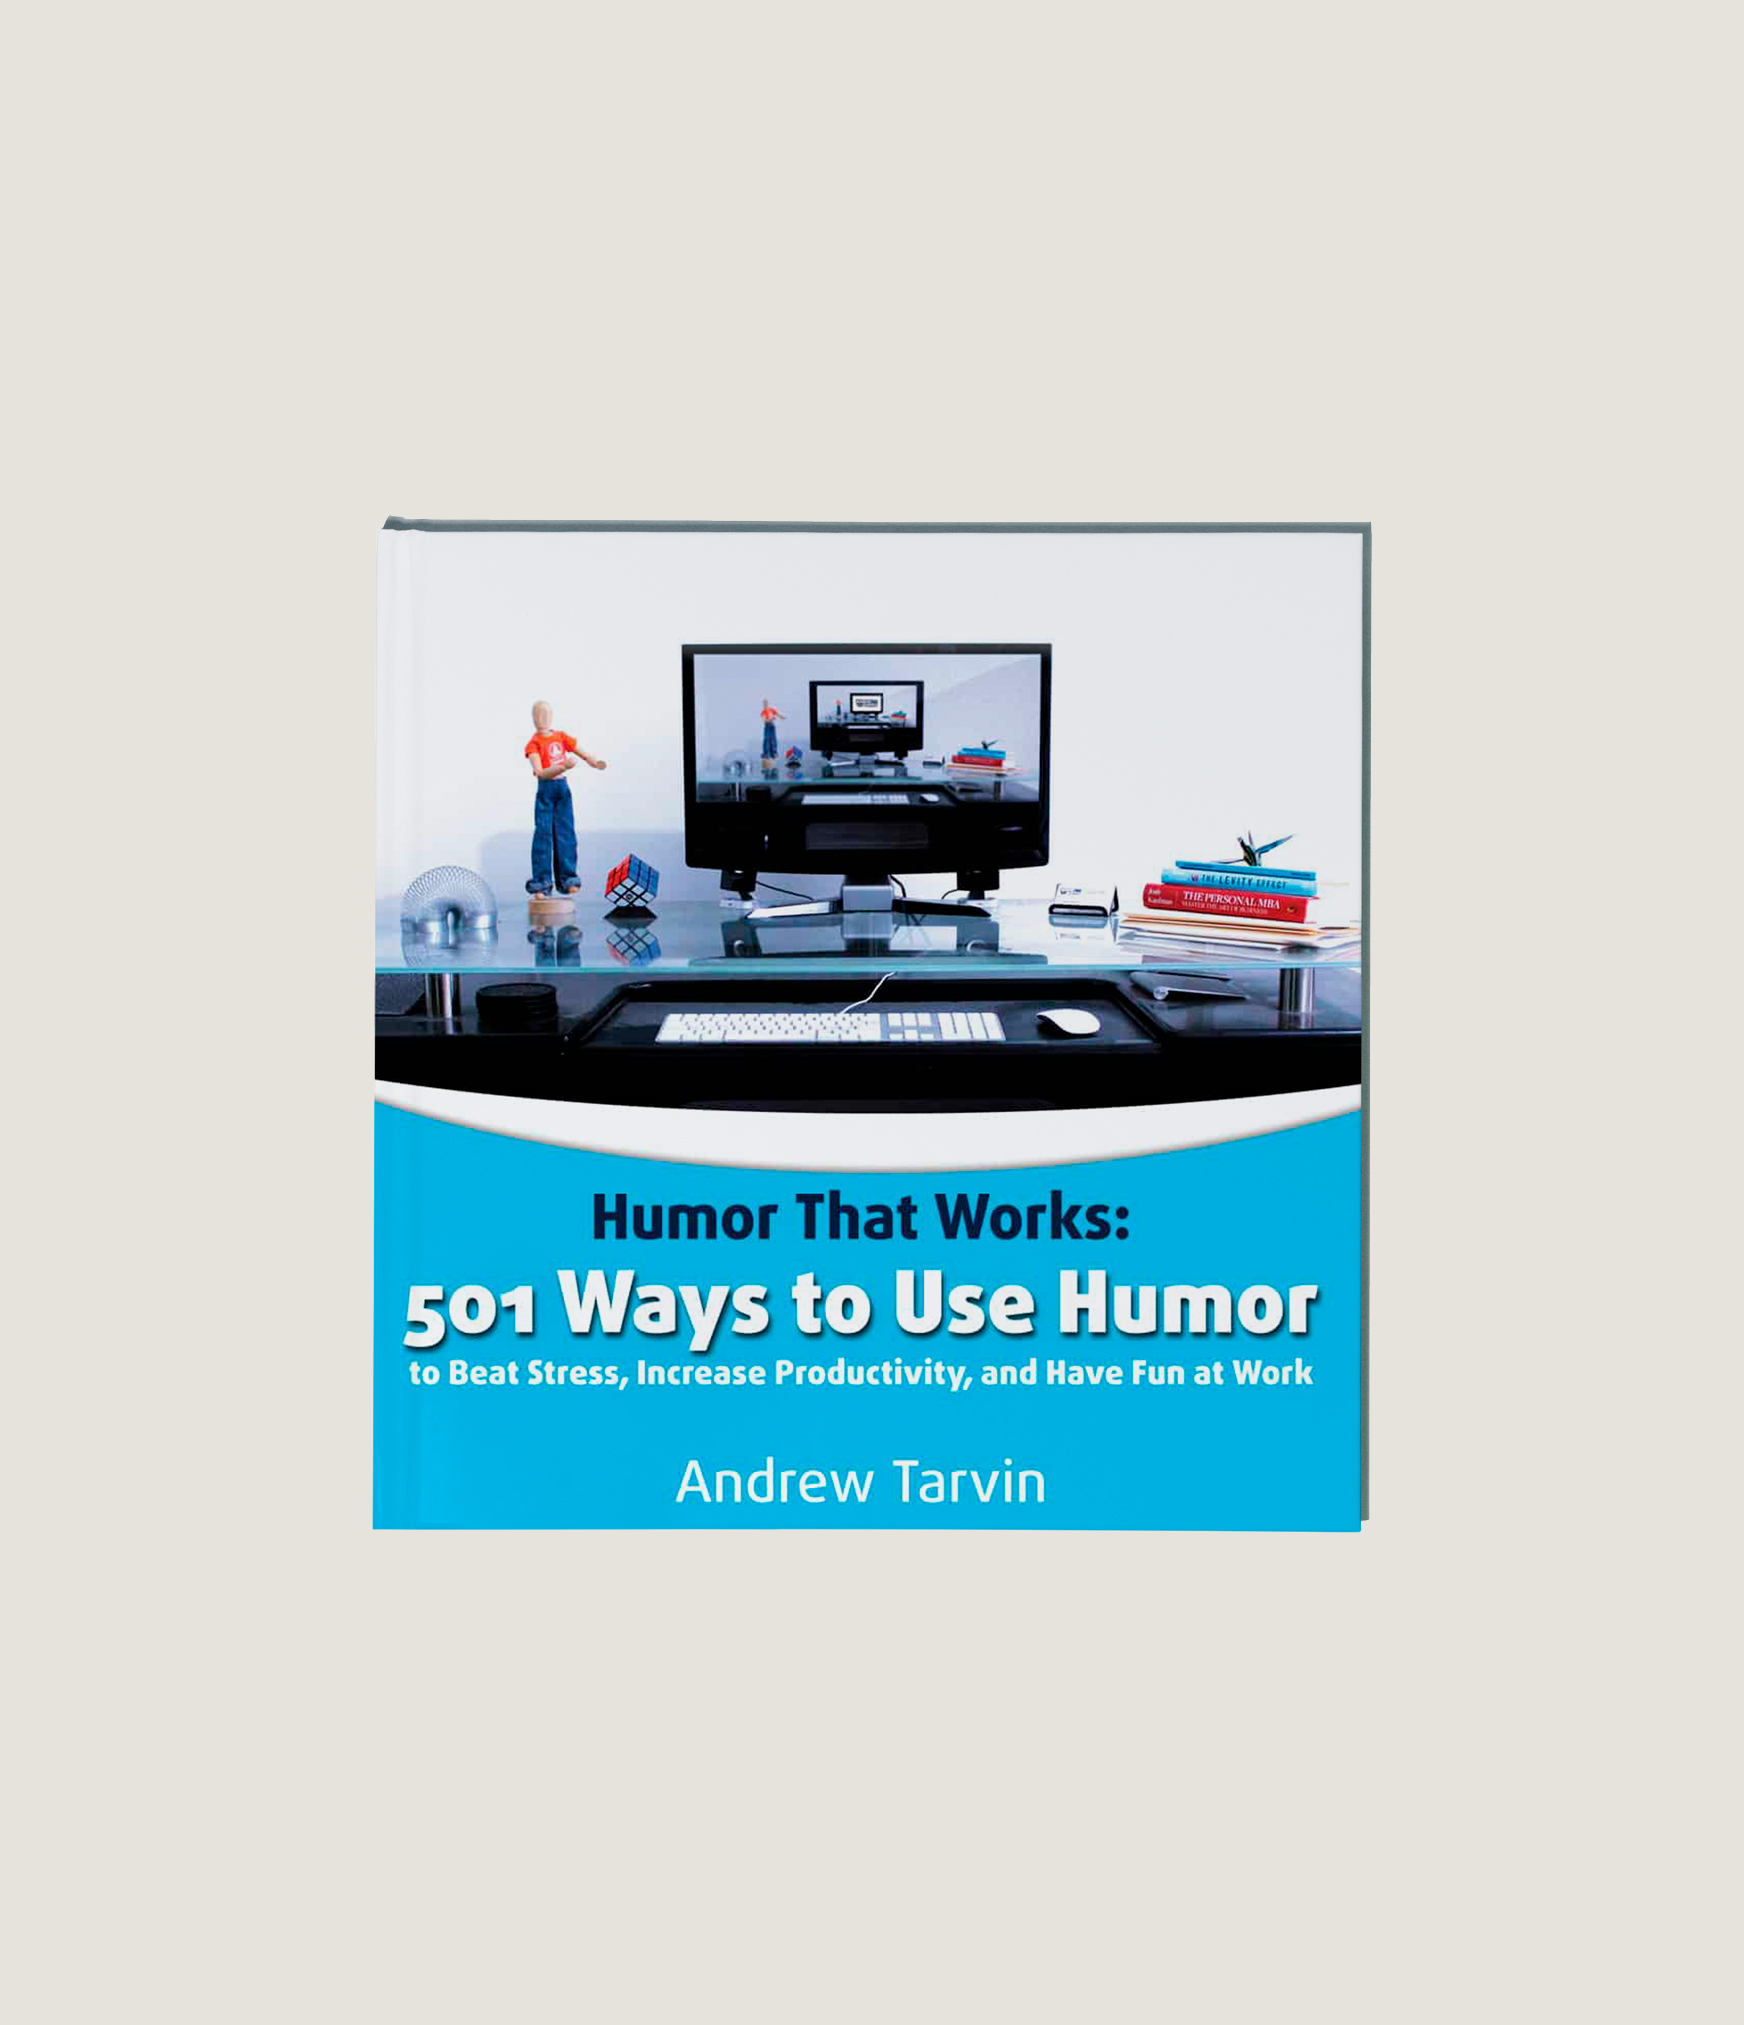 501-ways-to-use-humor-cover-andrew-tarvin-humor-engineer